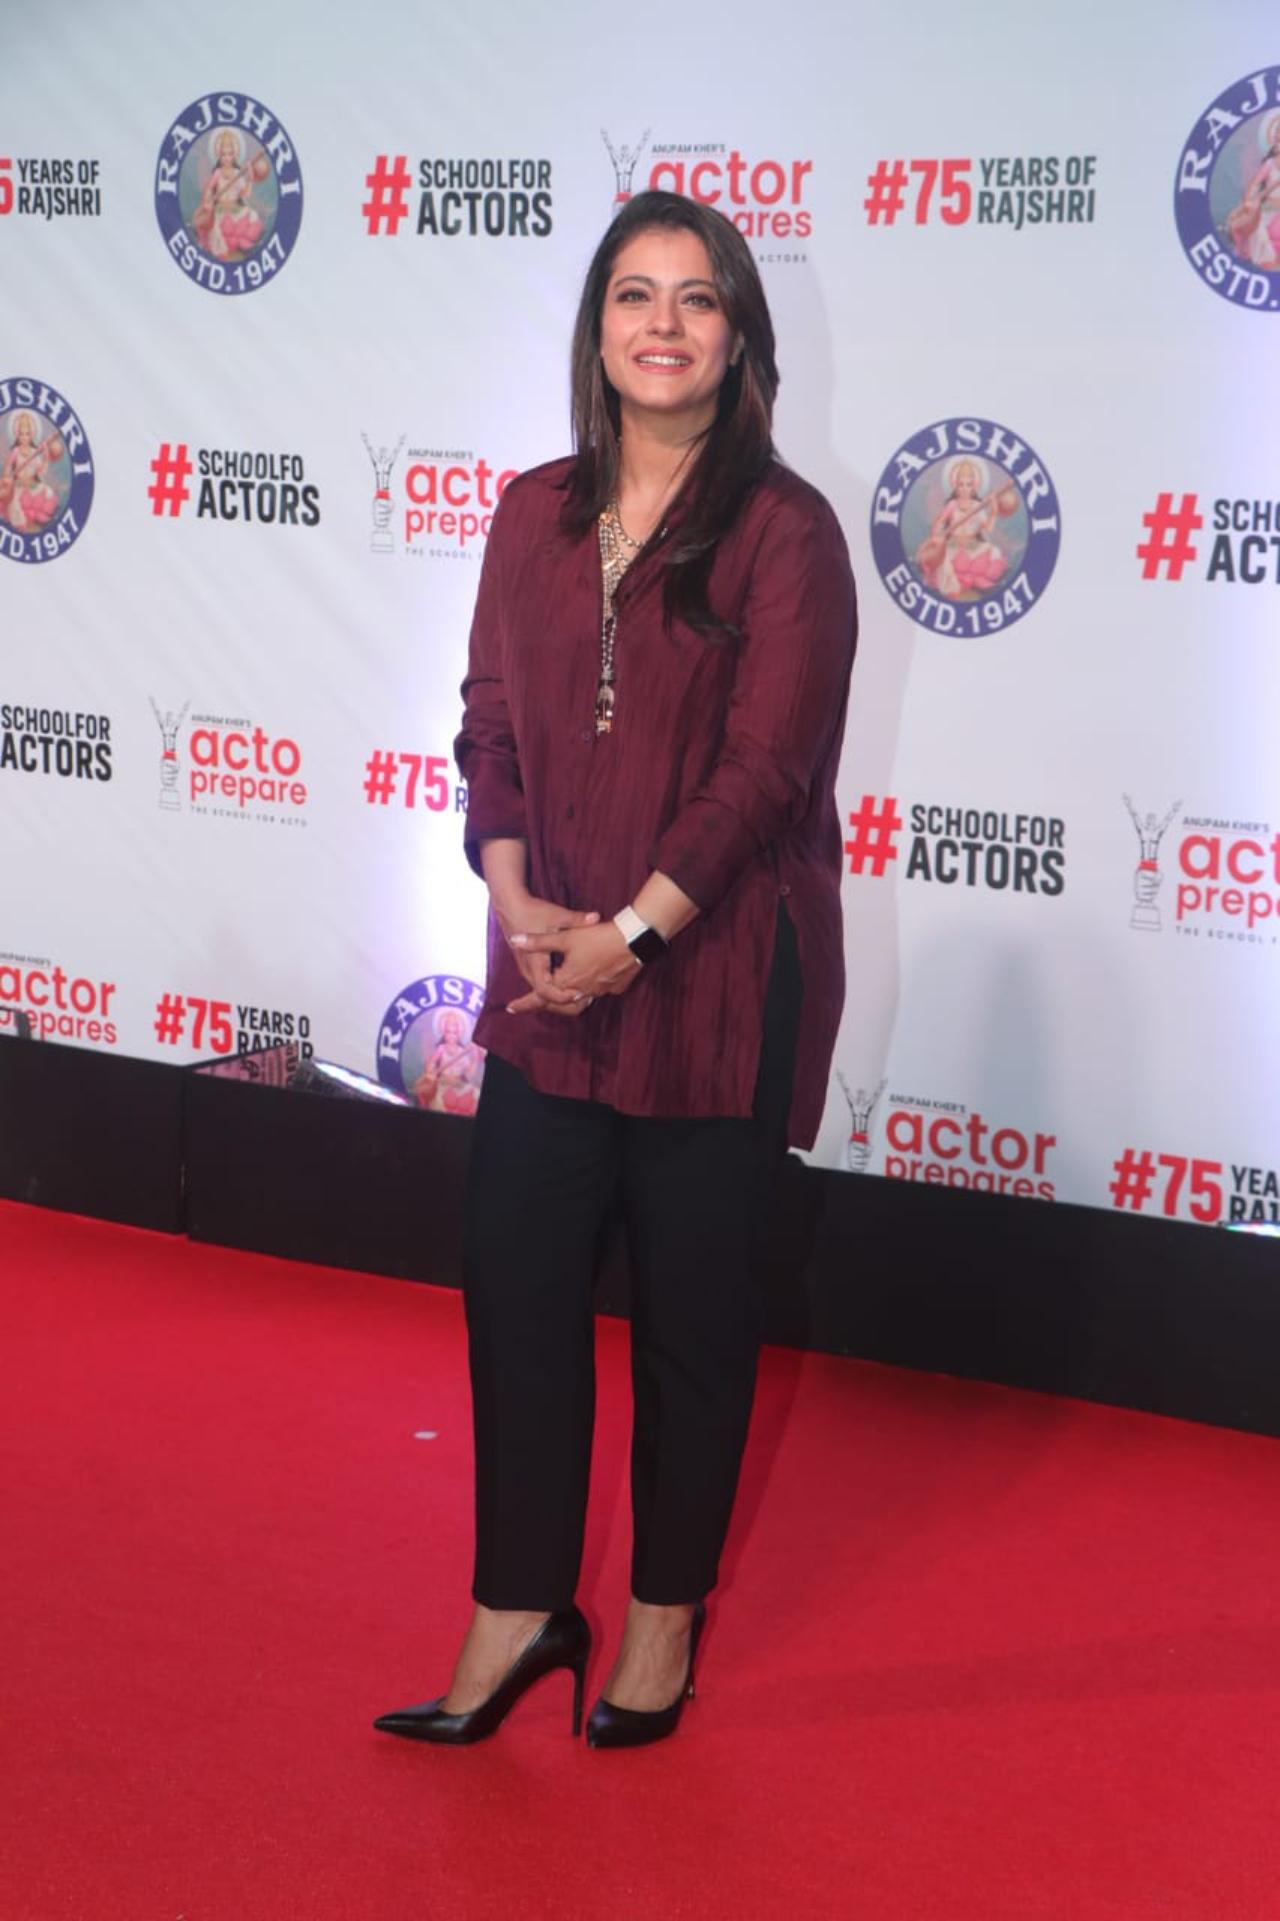 Several actors from the 90s were seen gracing the premiere. Kajol opted for a loose maroon top paired with black tights for the event. The actress was as usual all smiles for the paps